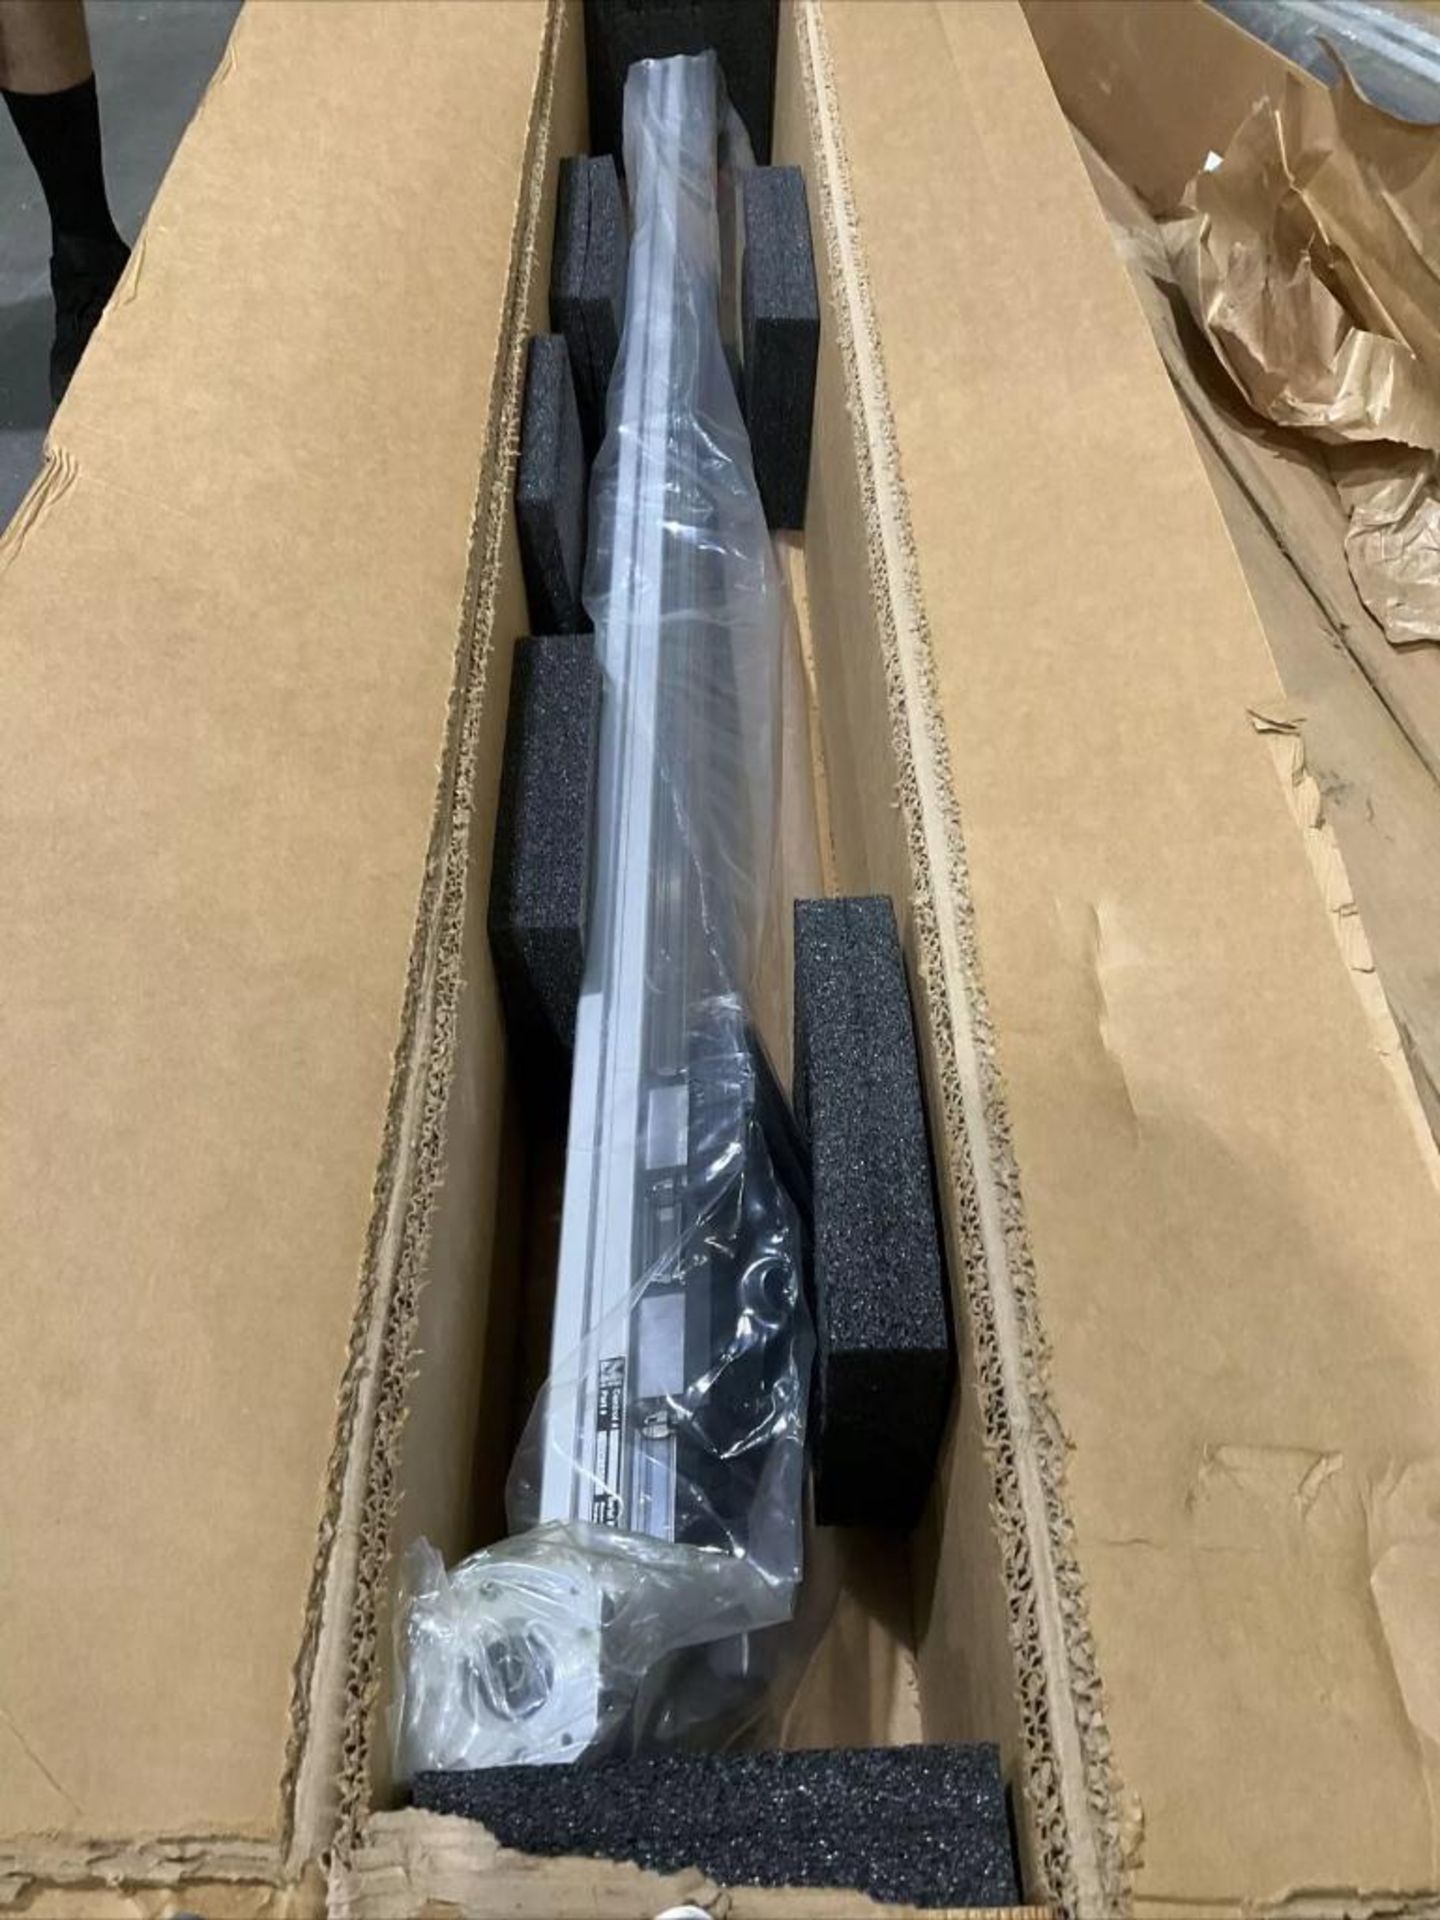 2 PALLETS OF MACRON DYNAMICS LINEAR ACTUATORS; VARIOUS LENGTHS, SIZES, AND CAPACITIES... - Image 26 of 32